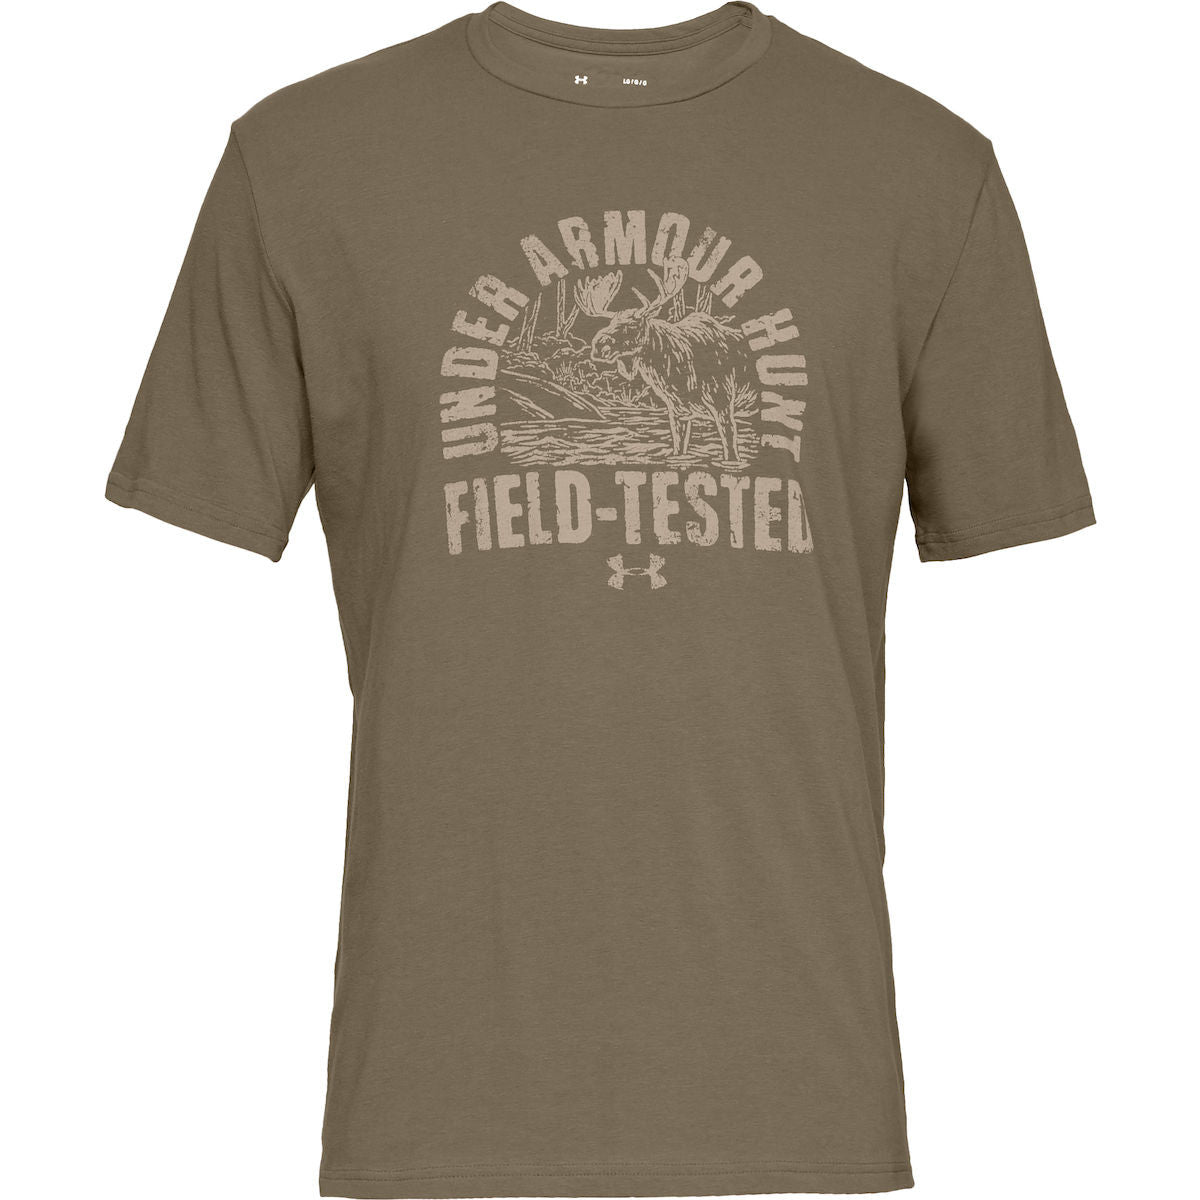 Under Armour Field Tested Moose Shirt